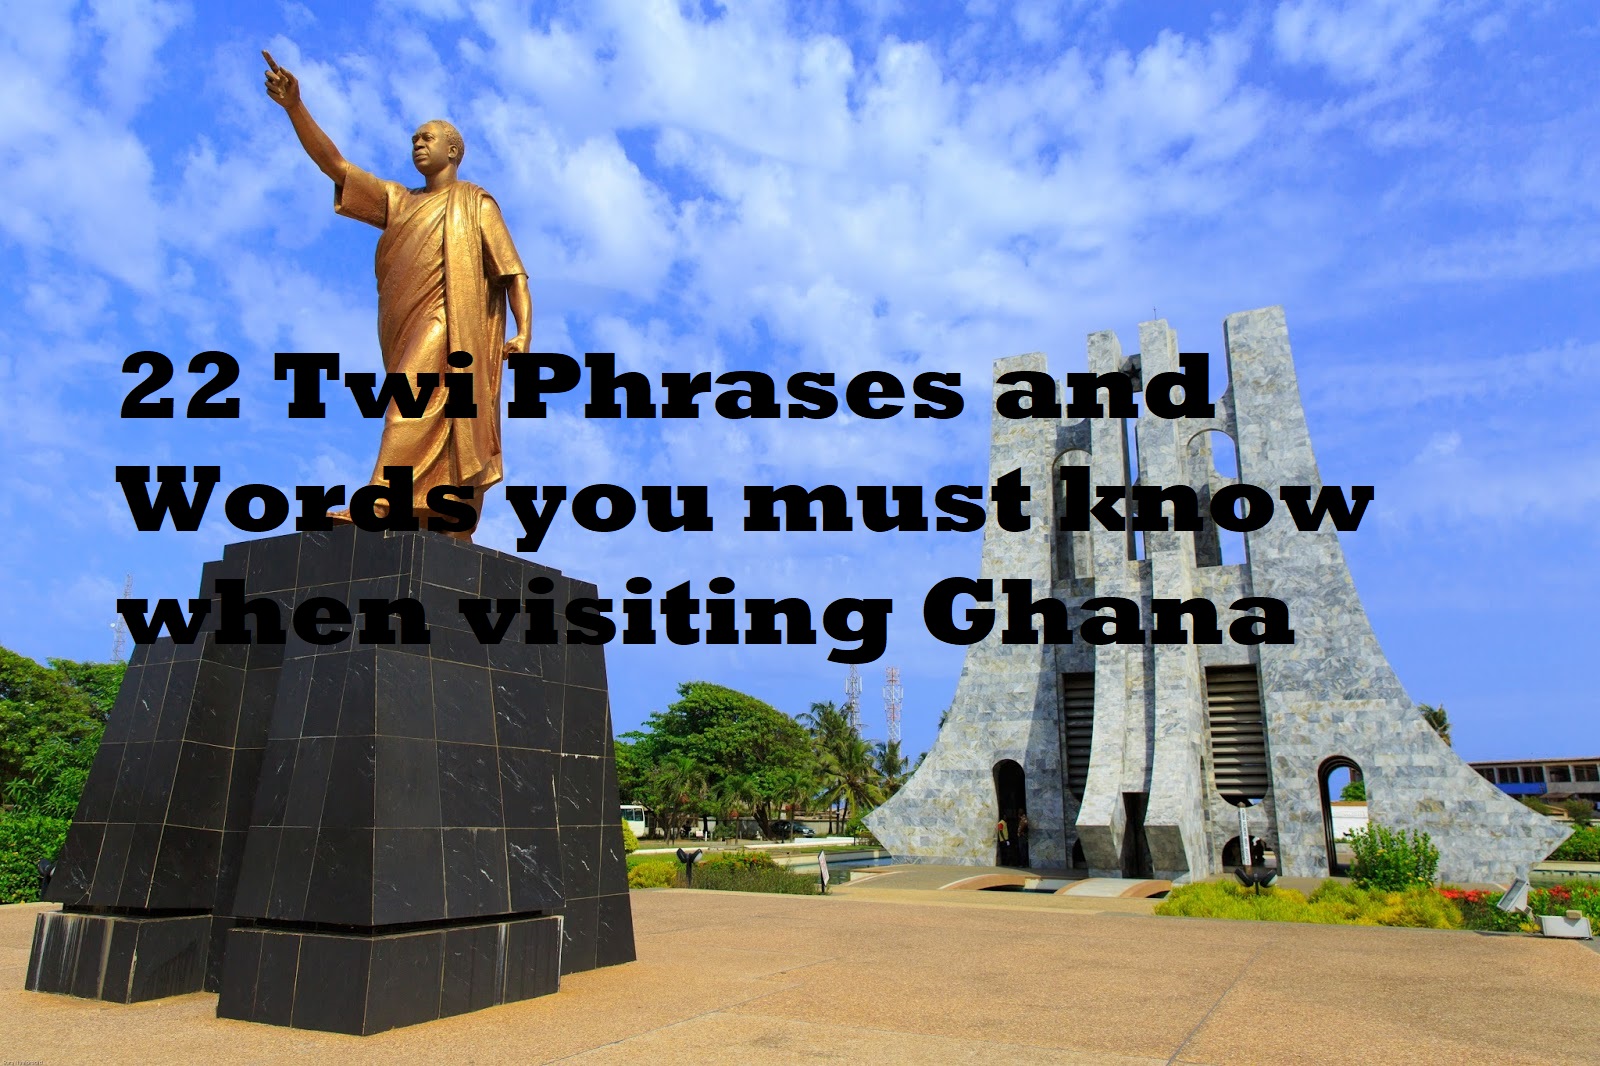 22 Twi Phrases and Words you must know when visiting Ghana